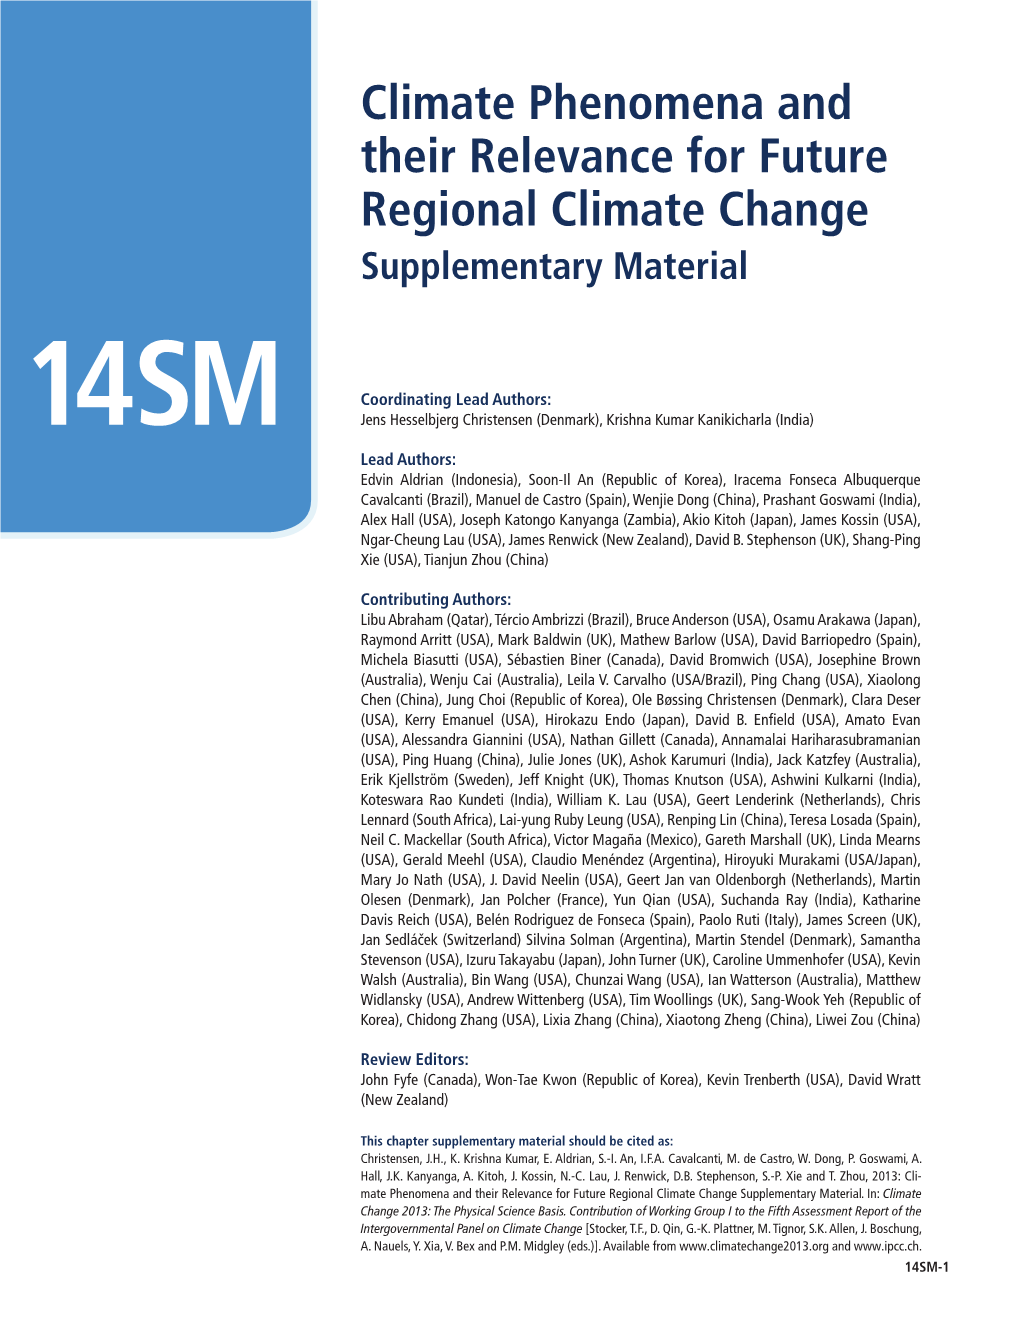 Climate Phenomena and Their Relevance for Future Regional Climate Change Supplementary Material